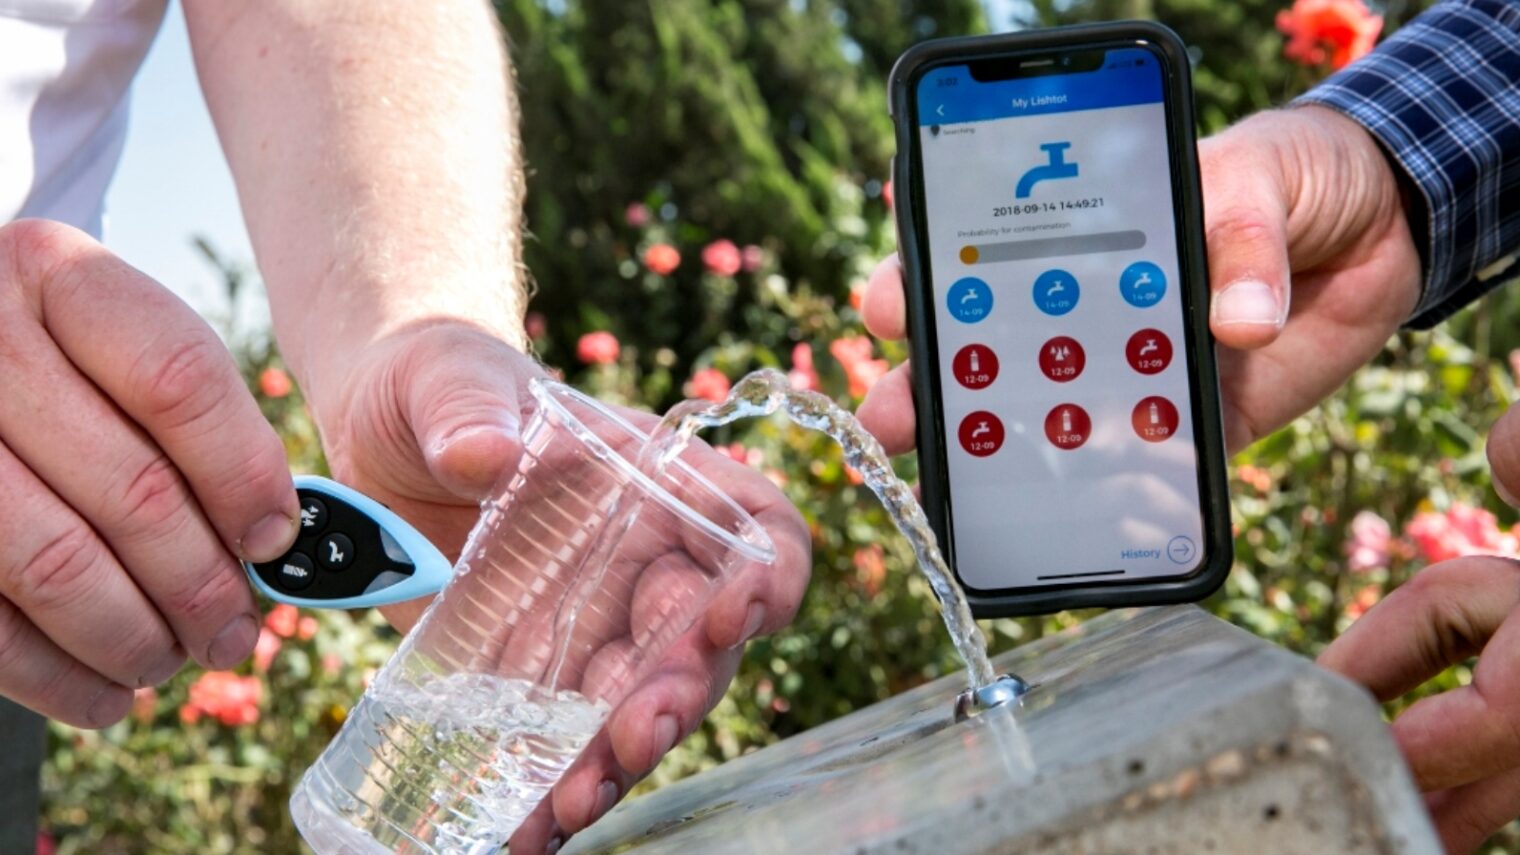 Lishtot’s TestDrop Pro finds contaminants in water without touching the water. Photo by Oliver Fitoussi/Lishtot